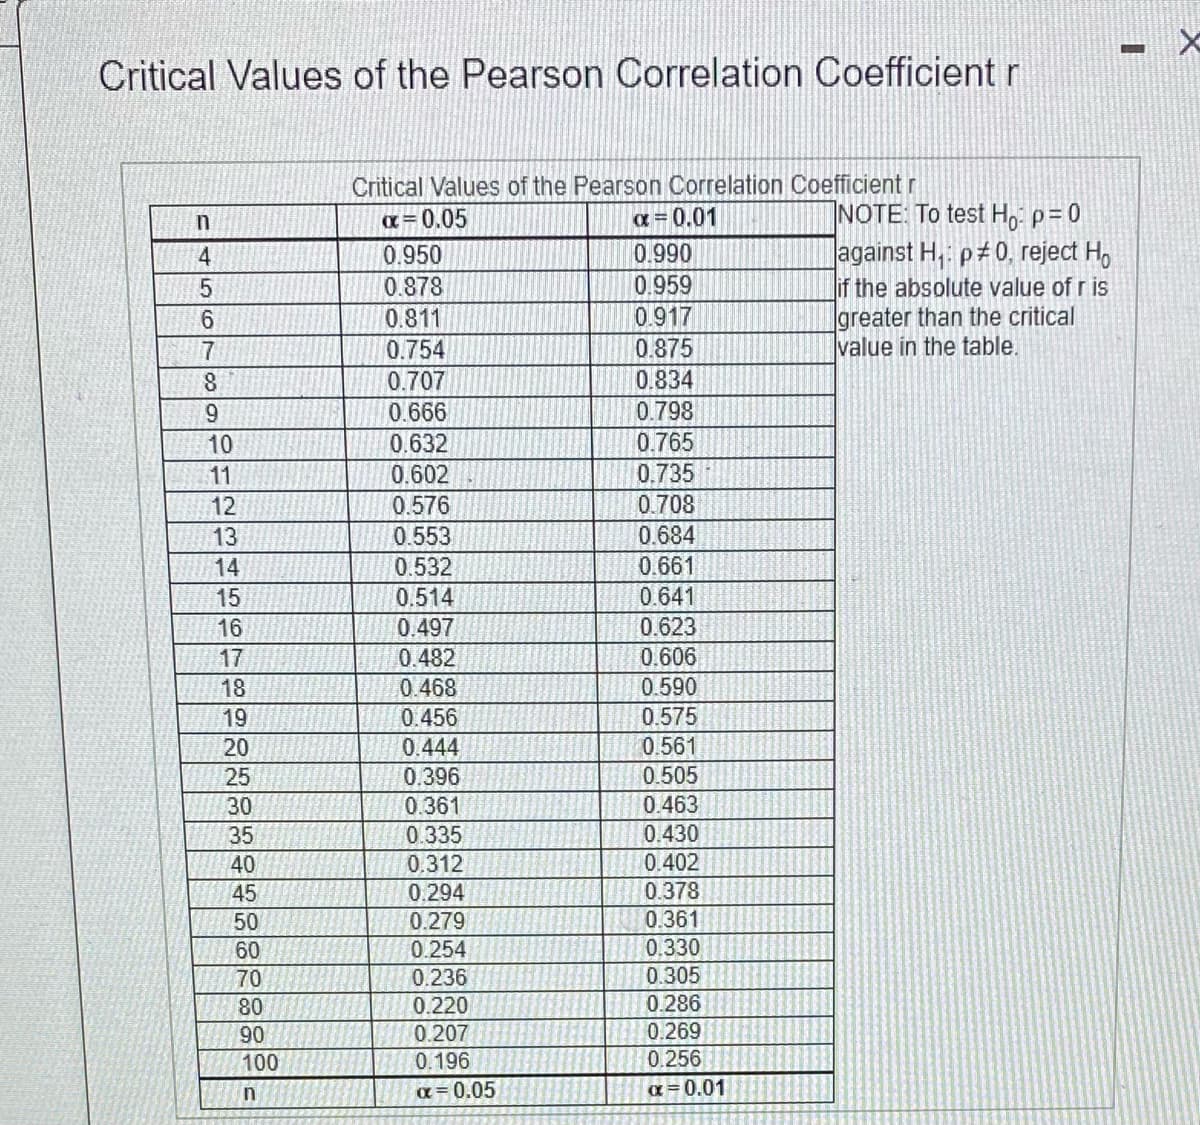 Critical Values of the Pearson Correlation Coefficient r
Critical Values of the Pearson Correlation Coefficient r
a = 0.01
NOTE: To test H, p= 0
|against H, p 0, reject H,
lif the absolute value of r is
greater than the critical
value in the table.
x=0.05
4
0.950
0.990
0.878
0.959
0.811
0.917
0.754
0.875
0.707
0.834
0.666
0.798
10
0.632
0.765
11
0.602
0.735
12
0.576
0.708
13
0.553
0.684
14
0.532
0.661
15
0.514
0.641
16
0.497
0.623
0.482
0 468
0.456
17
0.606
18
0.590
19
0.575
20
0.444
0.561
25
0.396
0.505
30
0.361
0.463
35
0.335
0.430
40
0.312
0.402
0.378
0.361
0.330
45
0.294
50
0.279
60
0.254
70
0.236
0.305
0.286
0.269
0.220
08
06
100
0.207
0.196
0.256
a = 0.05
a = 0.01
